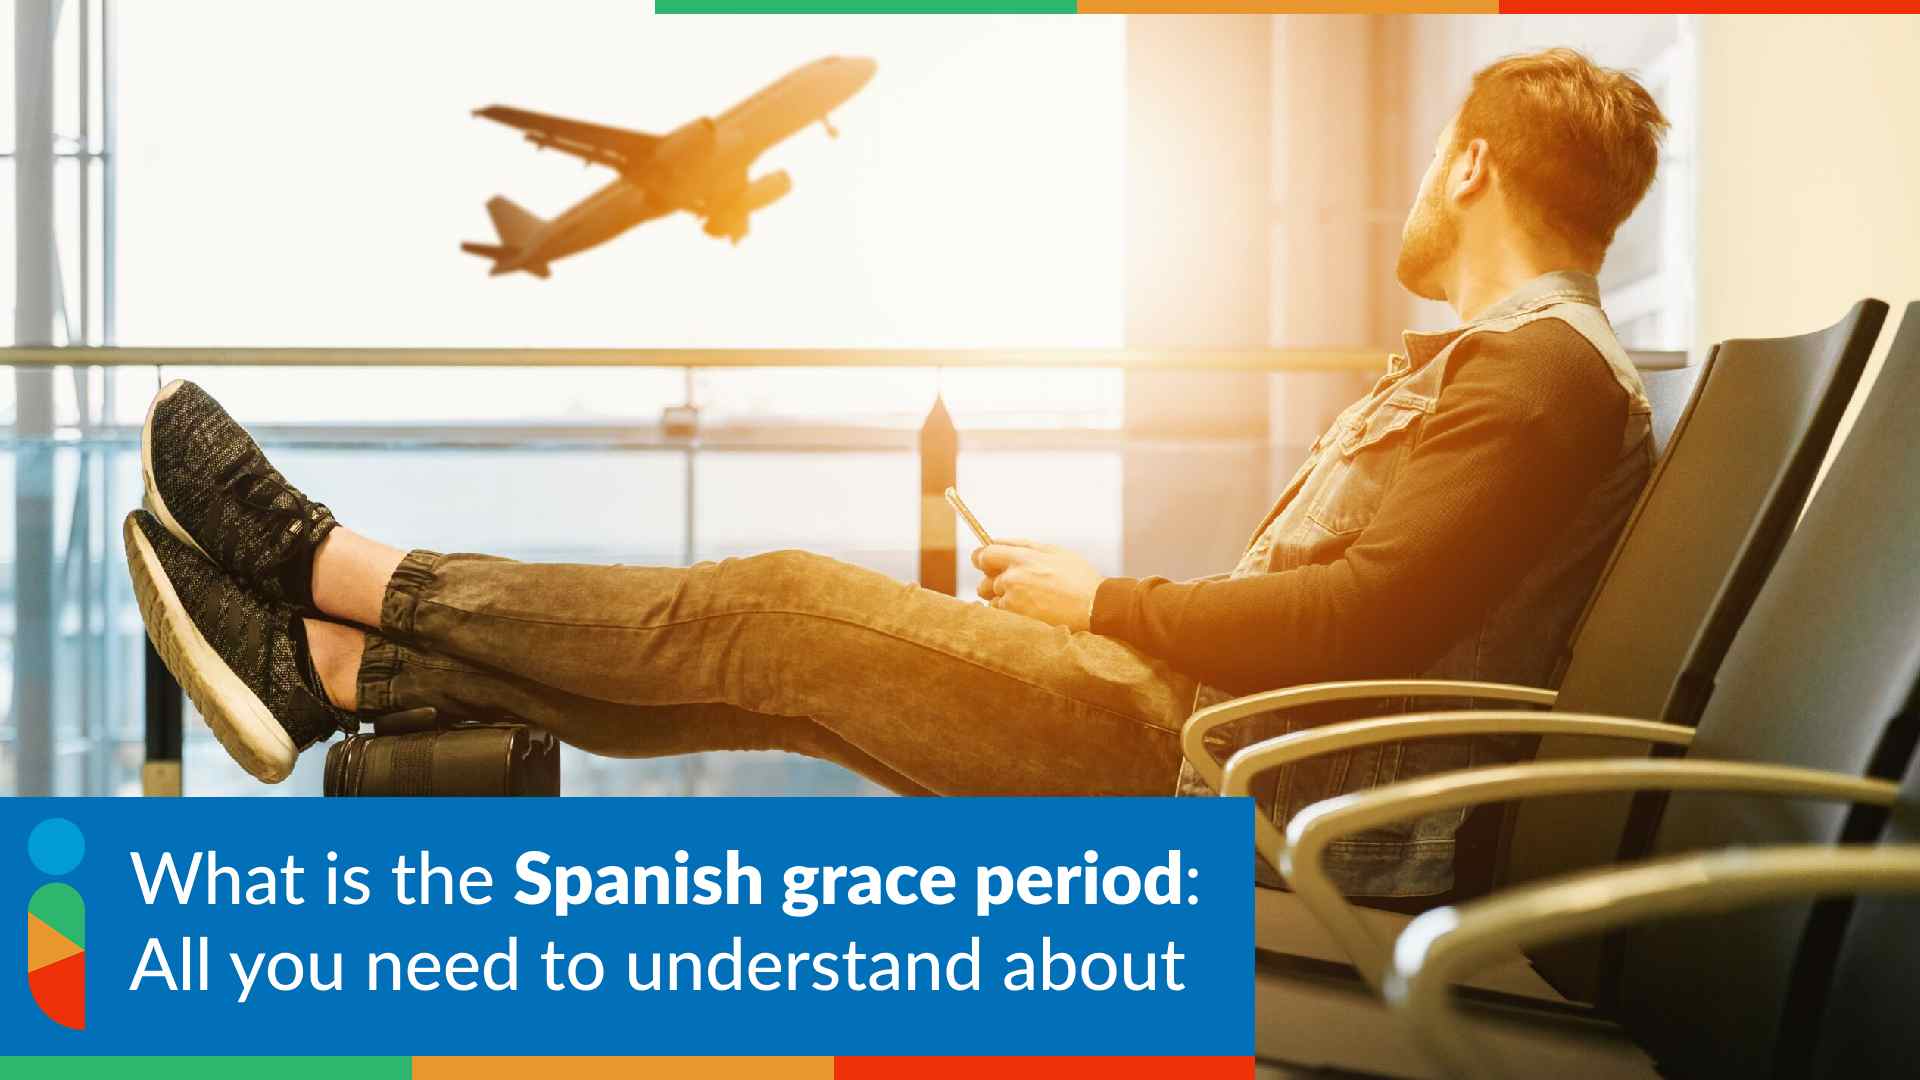 What is the Spanish grace period: All you need to understand about